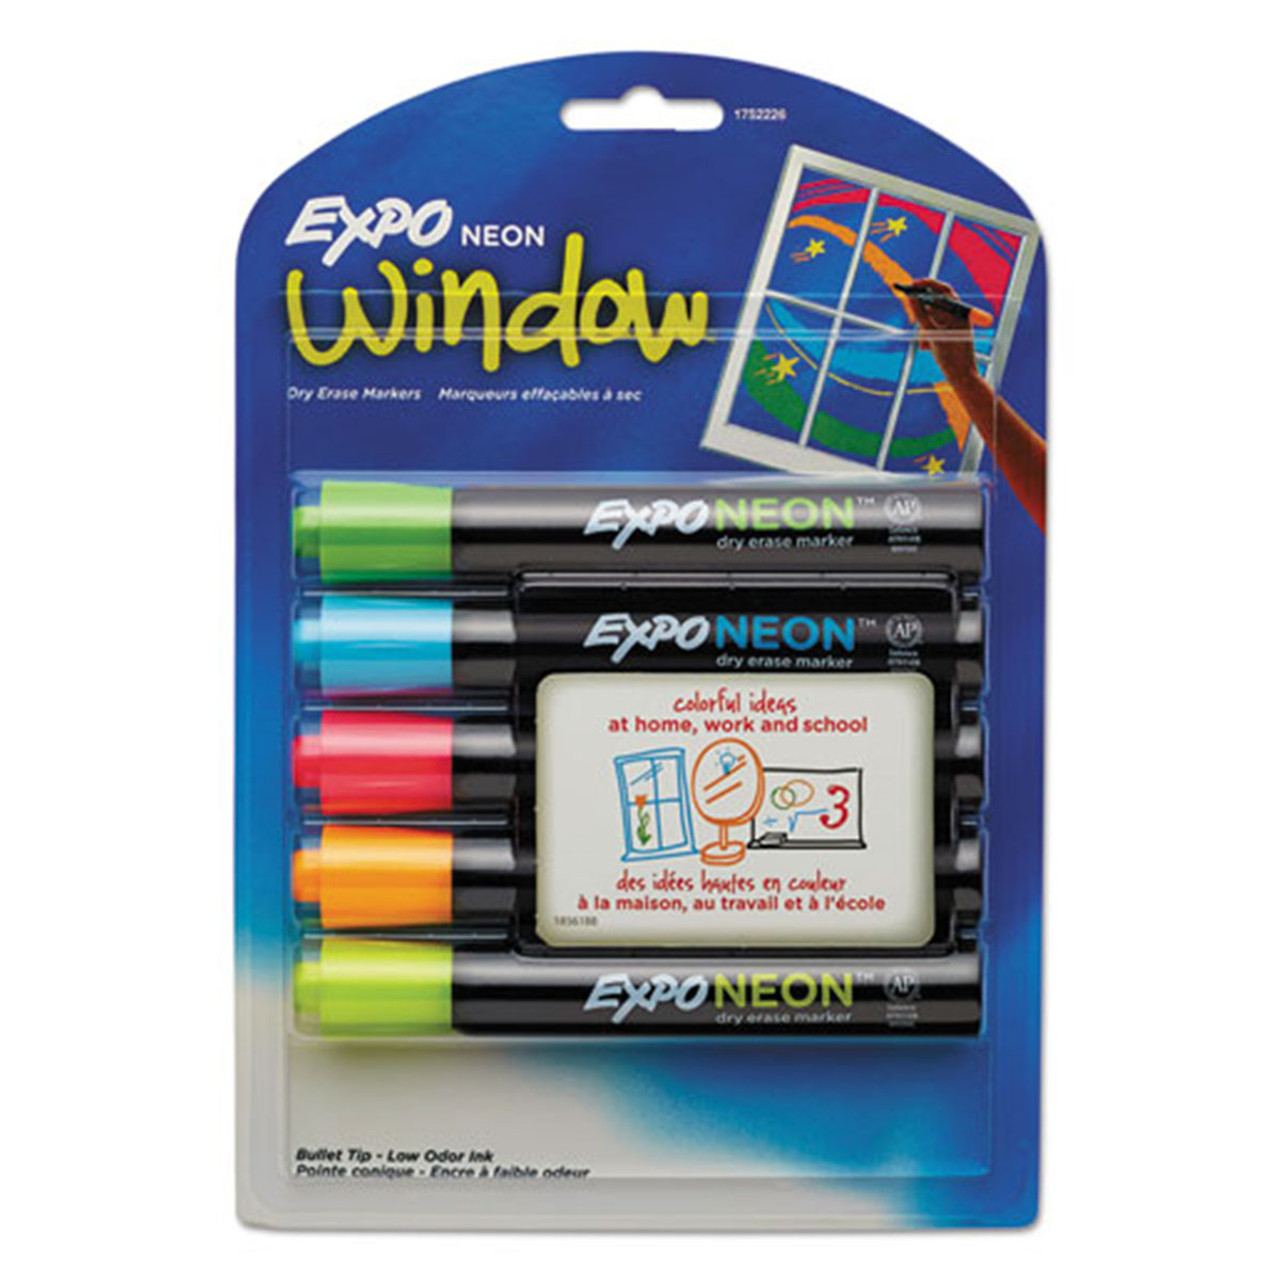 Wet Erase Markers  Bright Colors for Writing Safely on Glass Windows, –  Jot & Mark